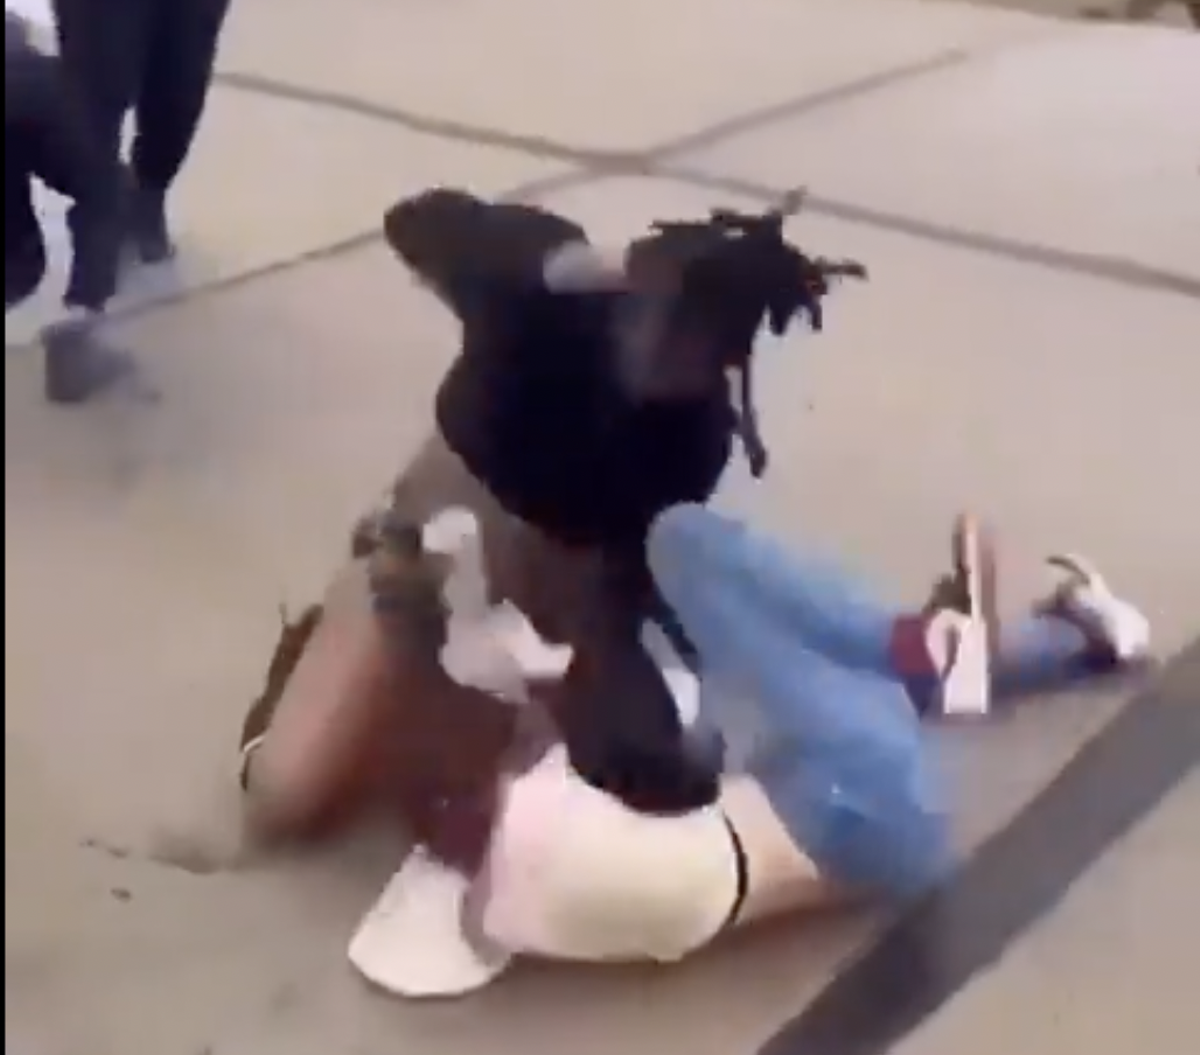 A video that went viral this weekend shows a 15-year-old beating another teen near Hazelwood East High School.